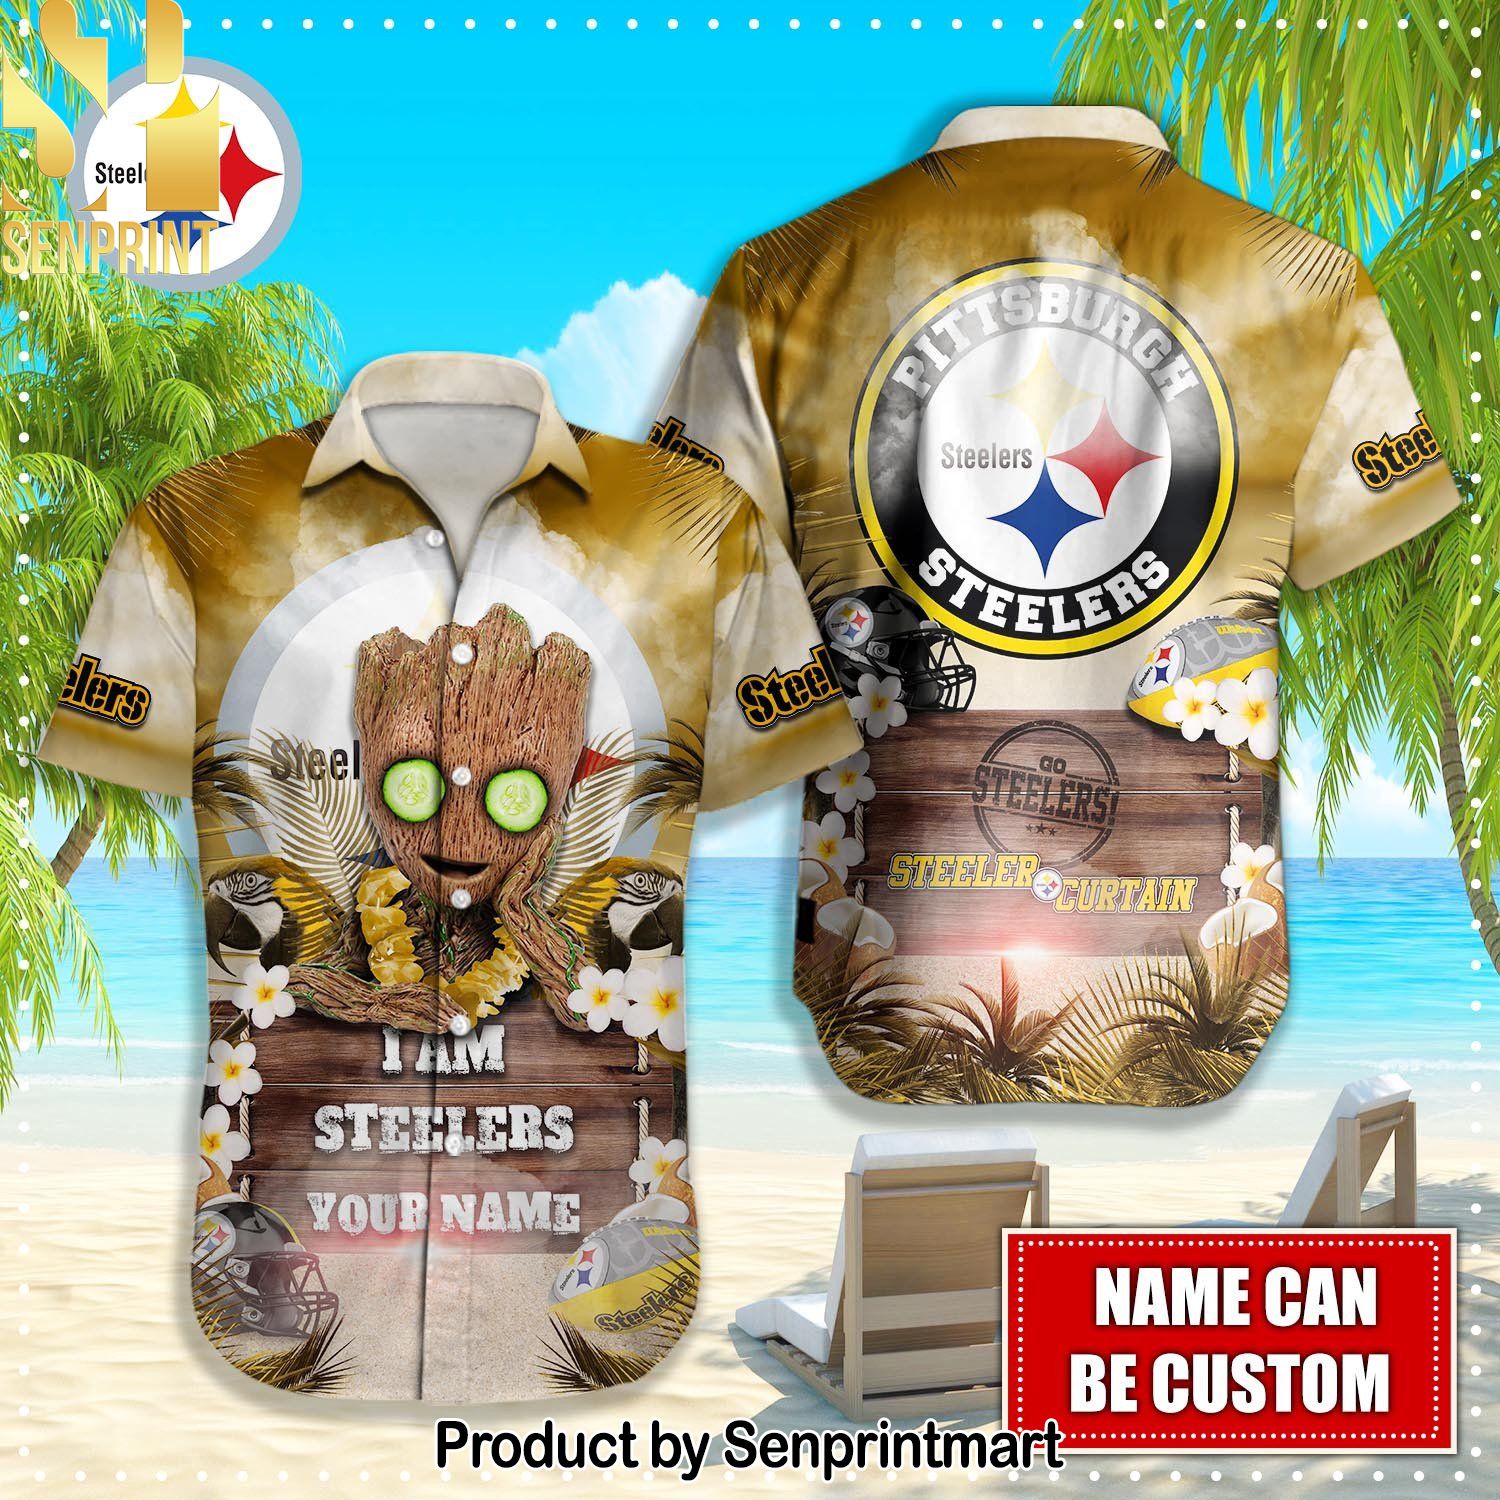 Pittsburgh Steelers NFL Amazing Outfit Hawaiian Shirt and Shorts